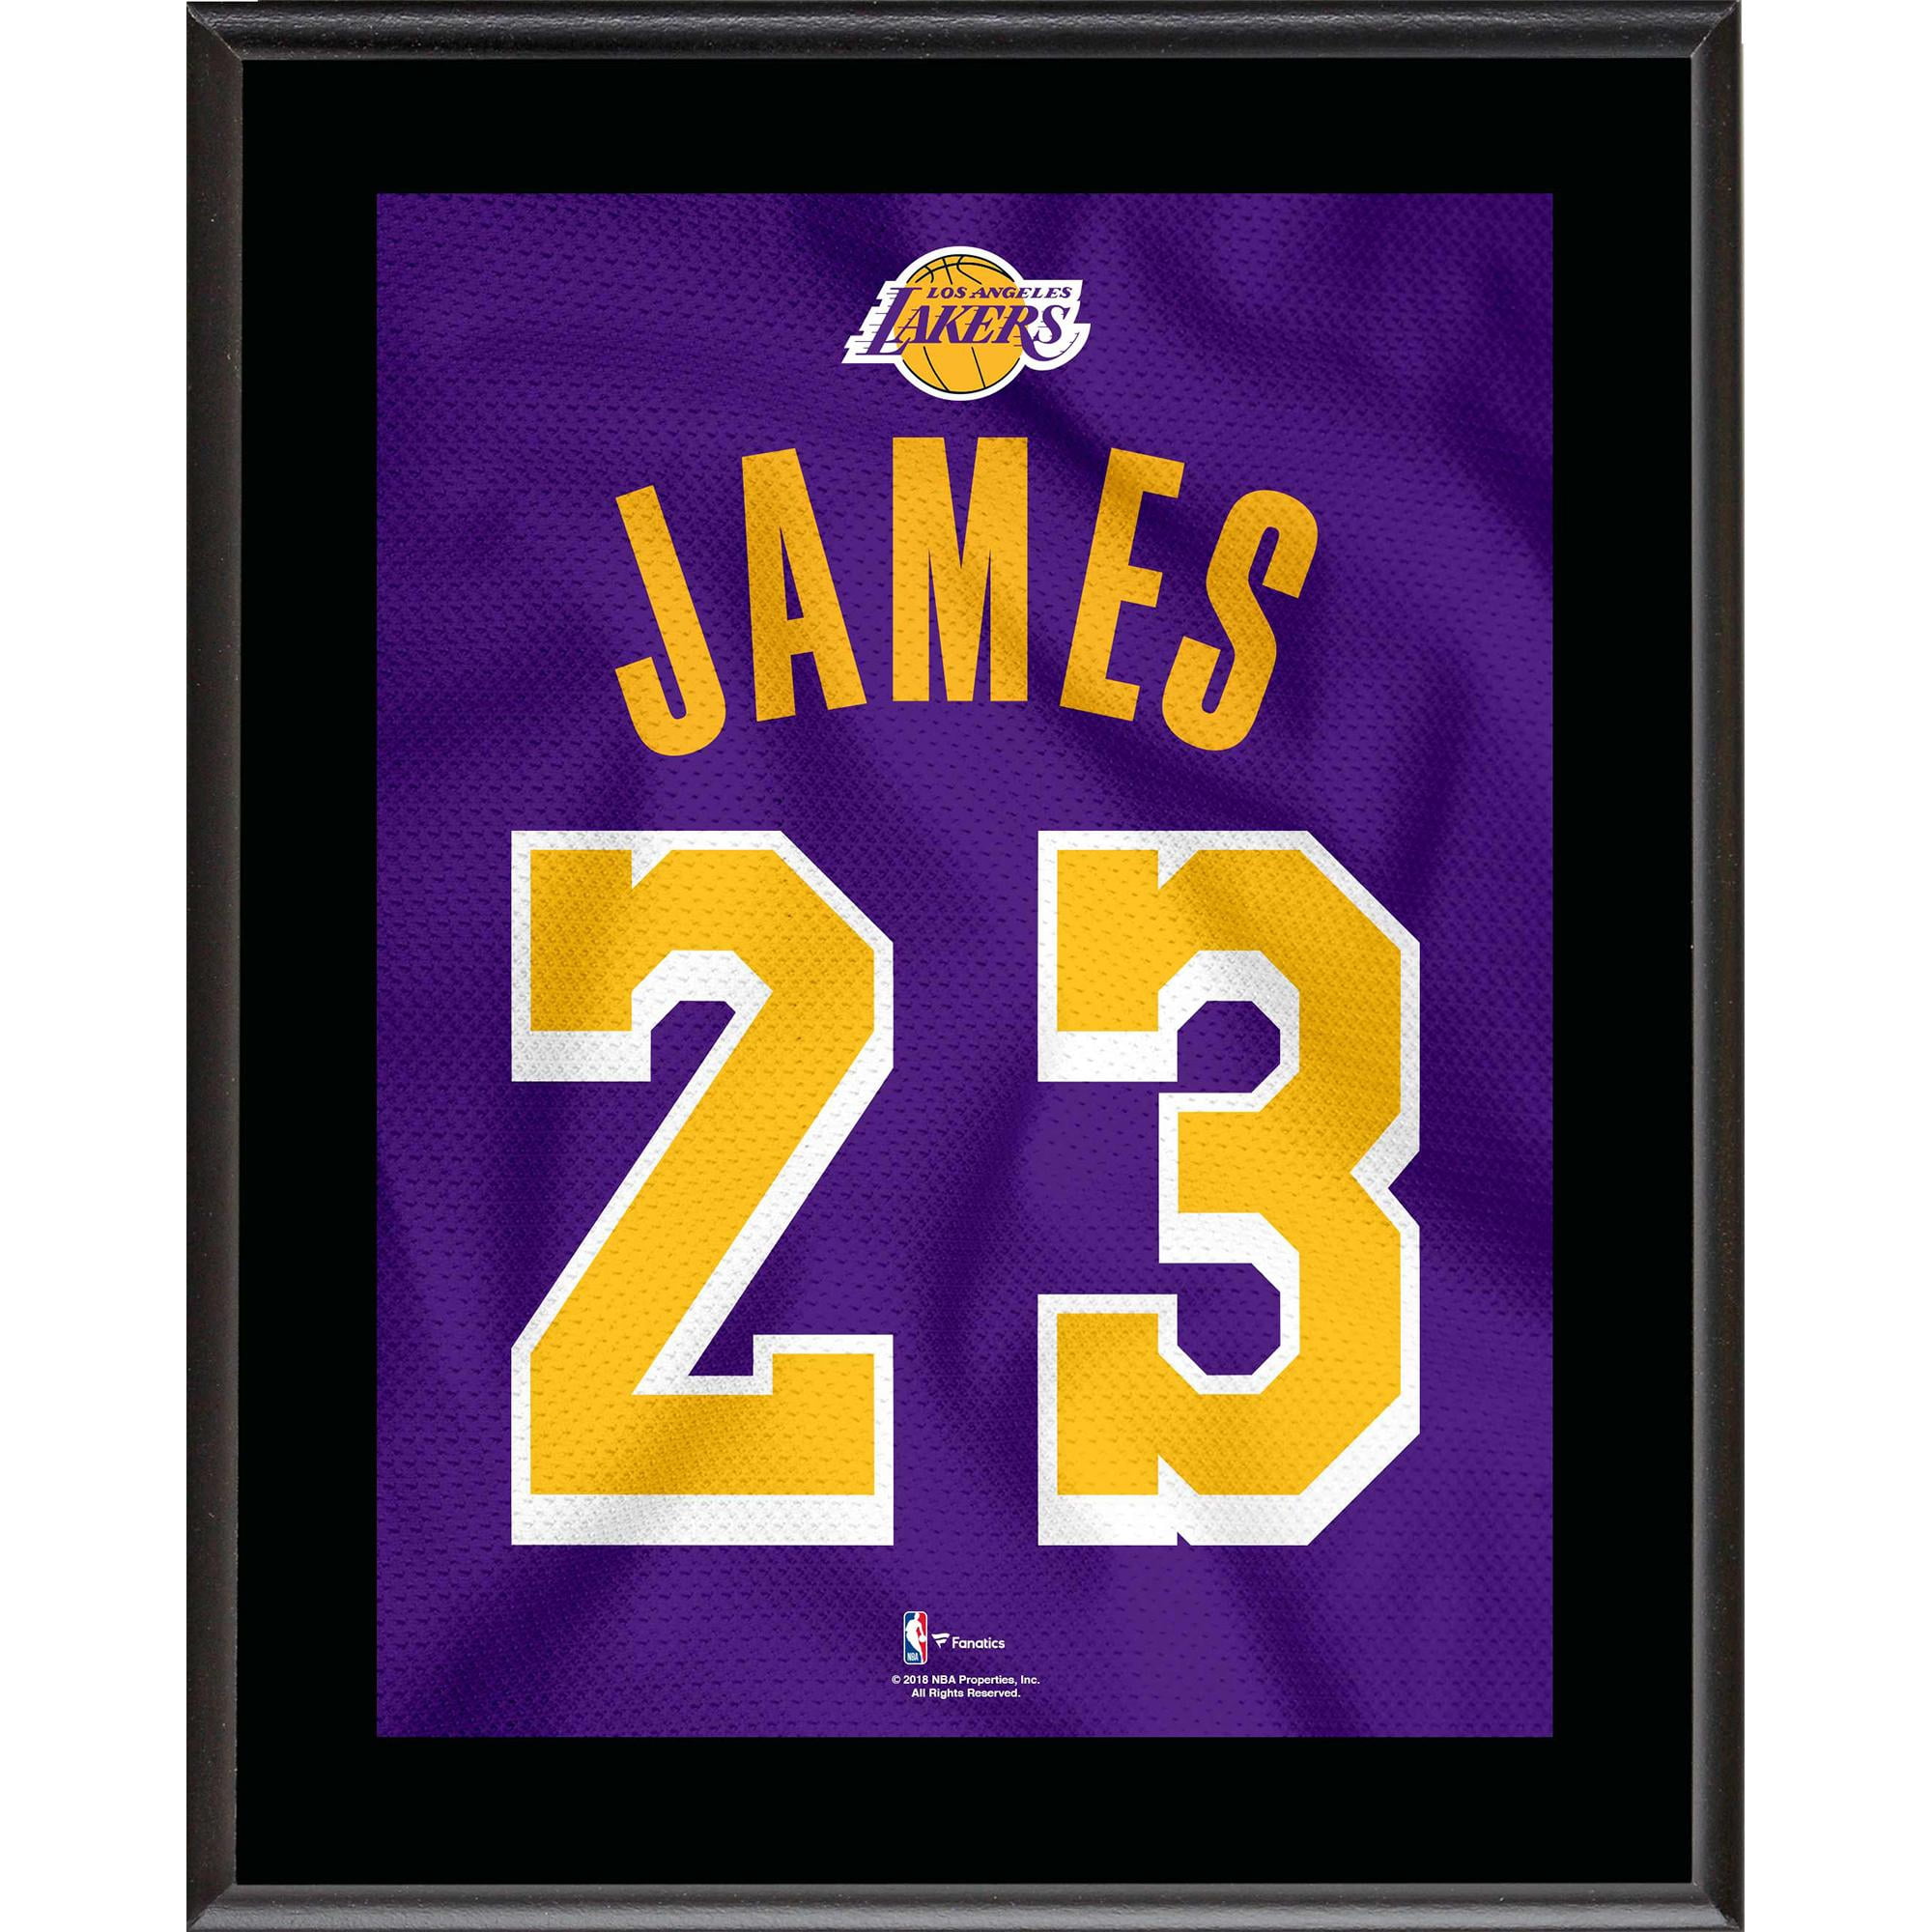 Los Angeles Lakers Apparel, Officially Licensed